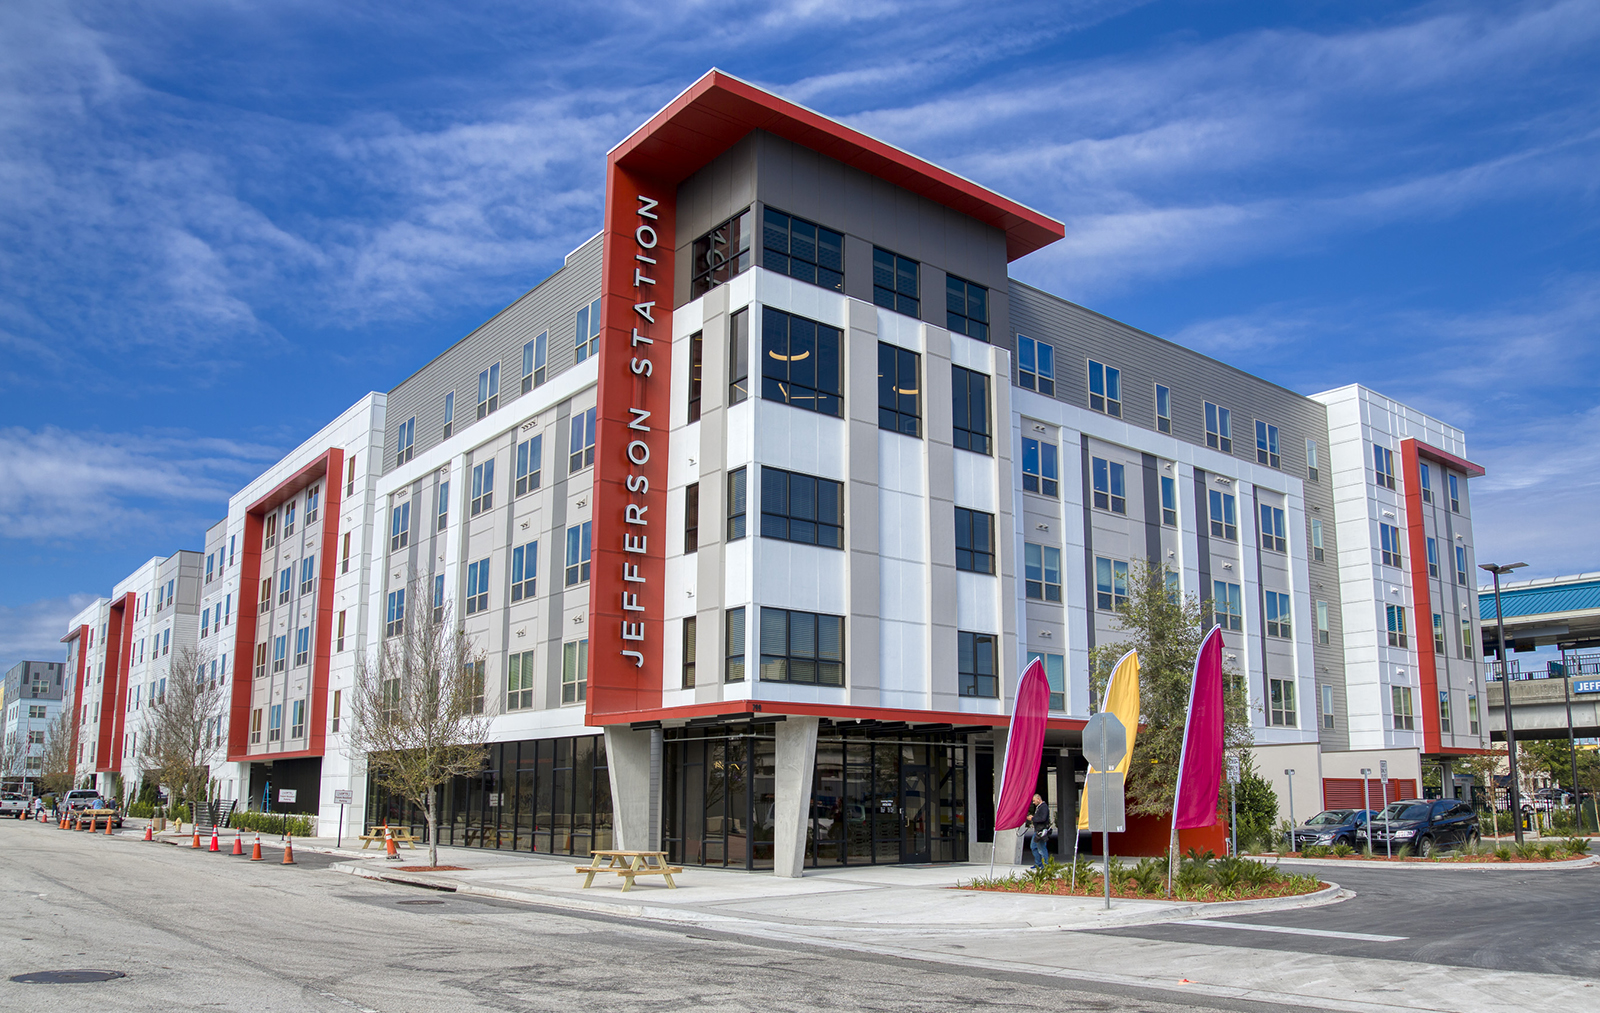 Lofts at Jefferson Multifamily Affordable Housing in Jacksonville, Florida